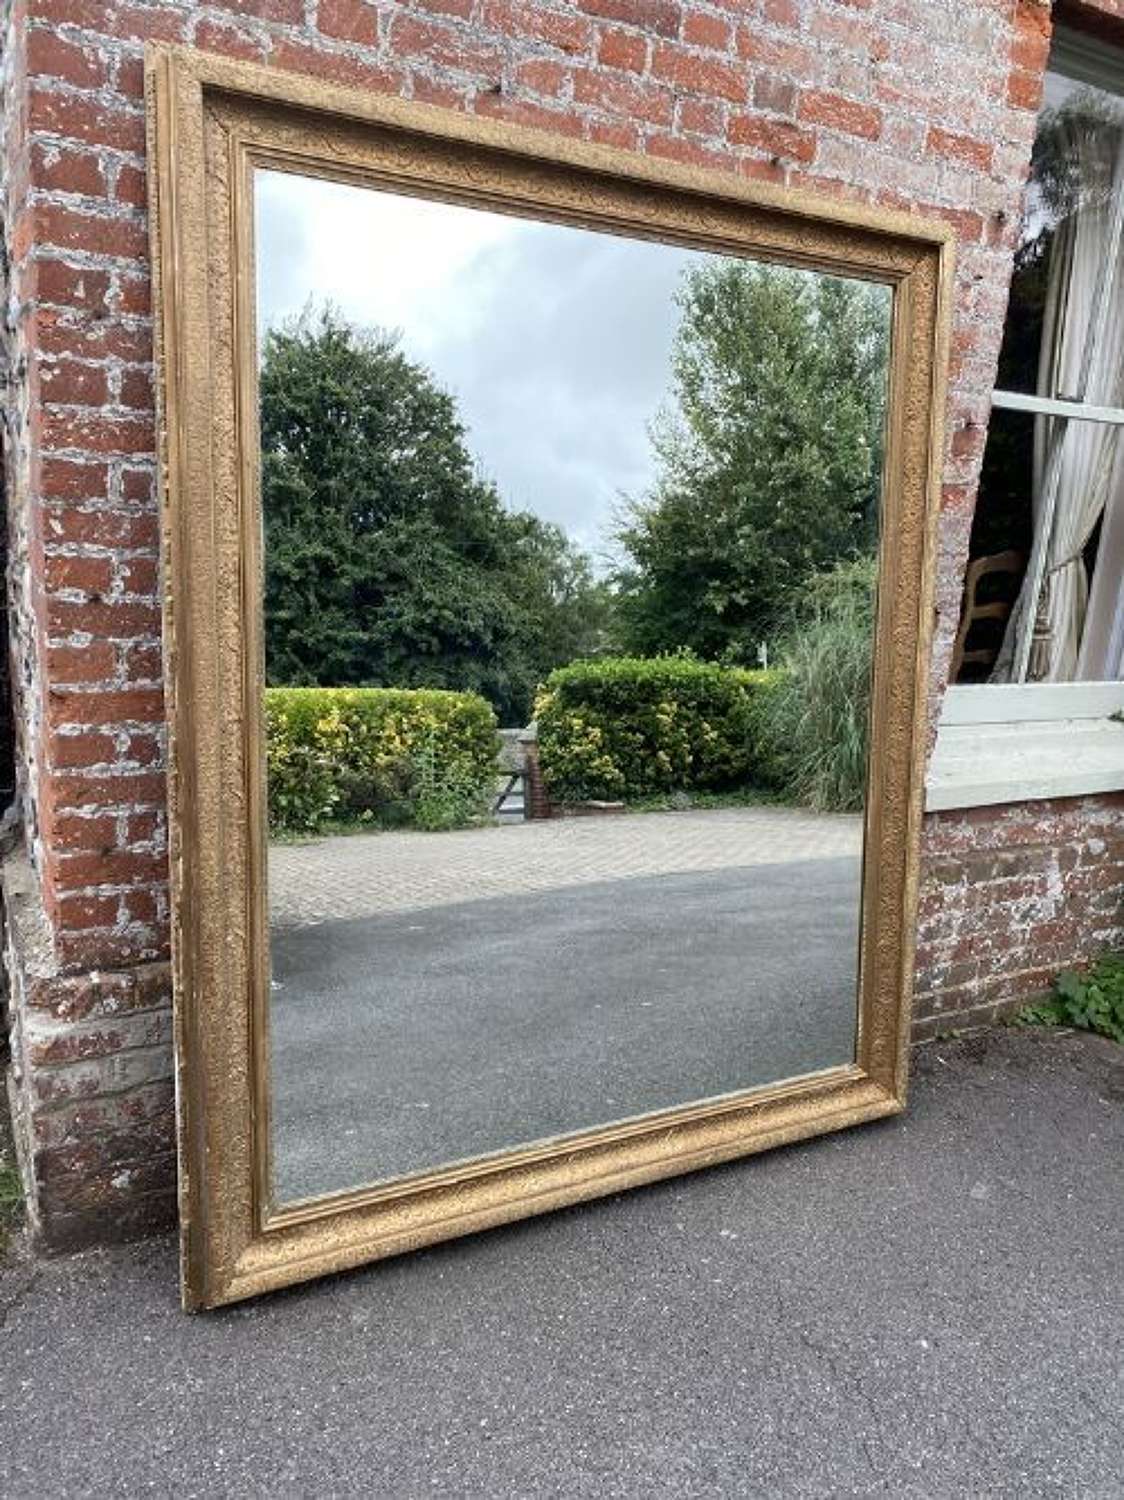 A Superb Large Antique English 19th Carved Wood & Gesso Gilt Mirror.